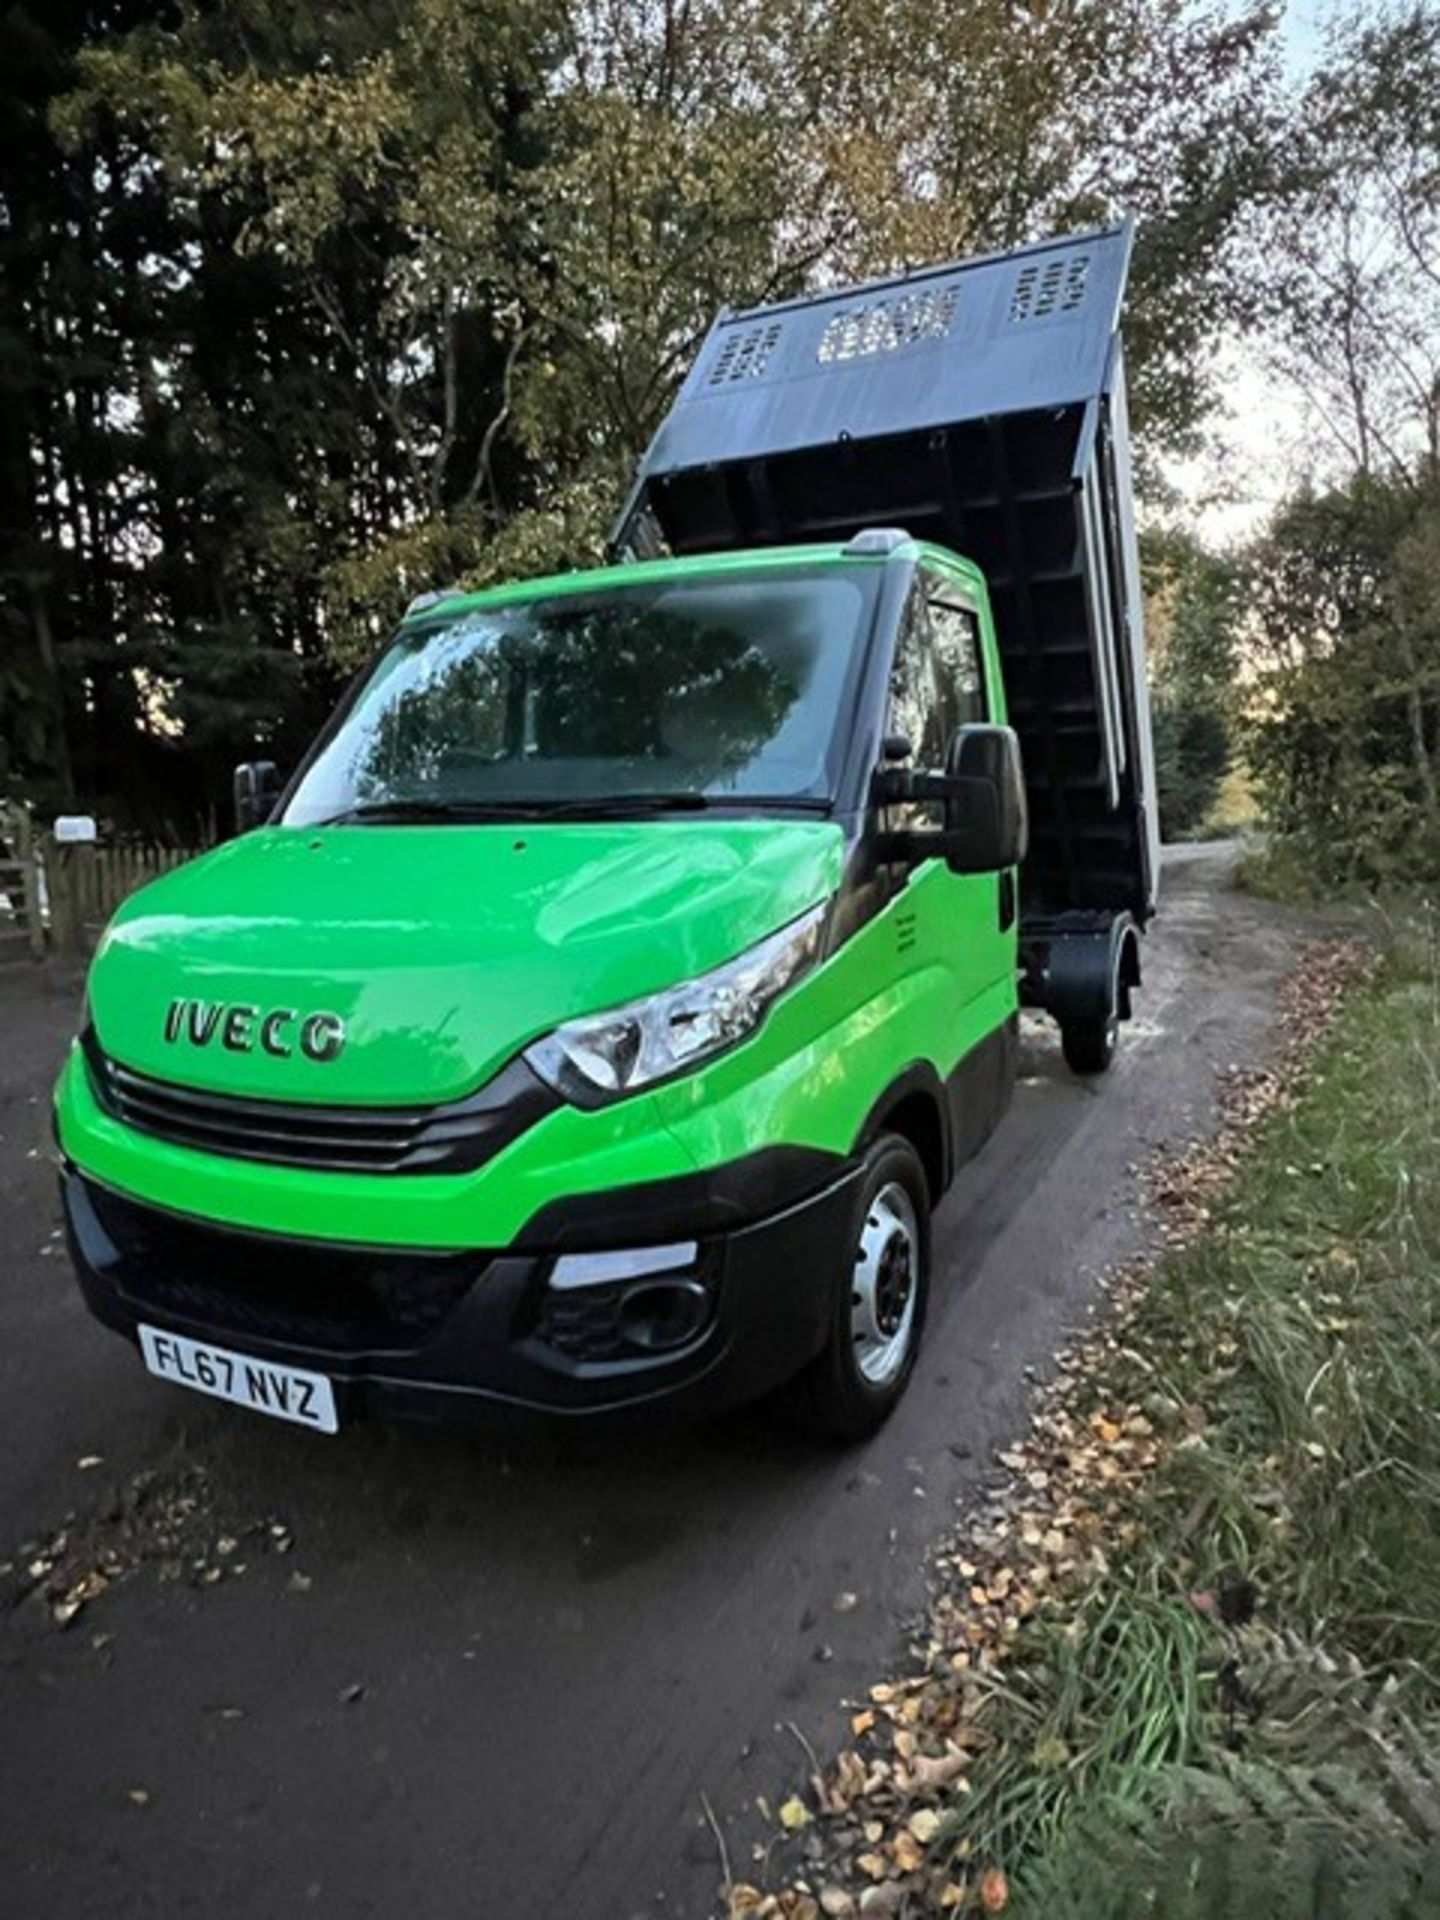 IVECO DAILY TIPPER TRUCK (2017). SINGLE